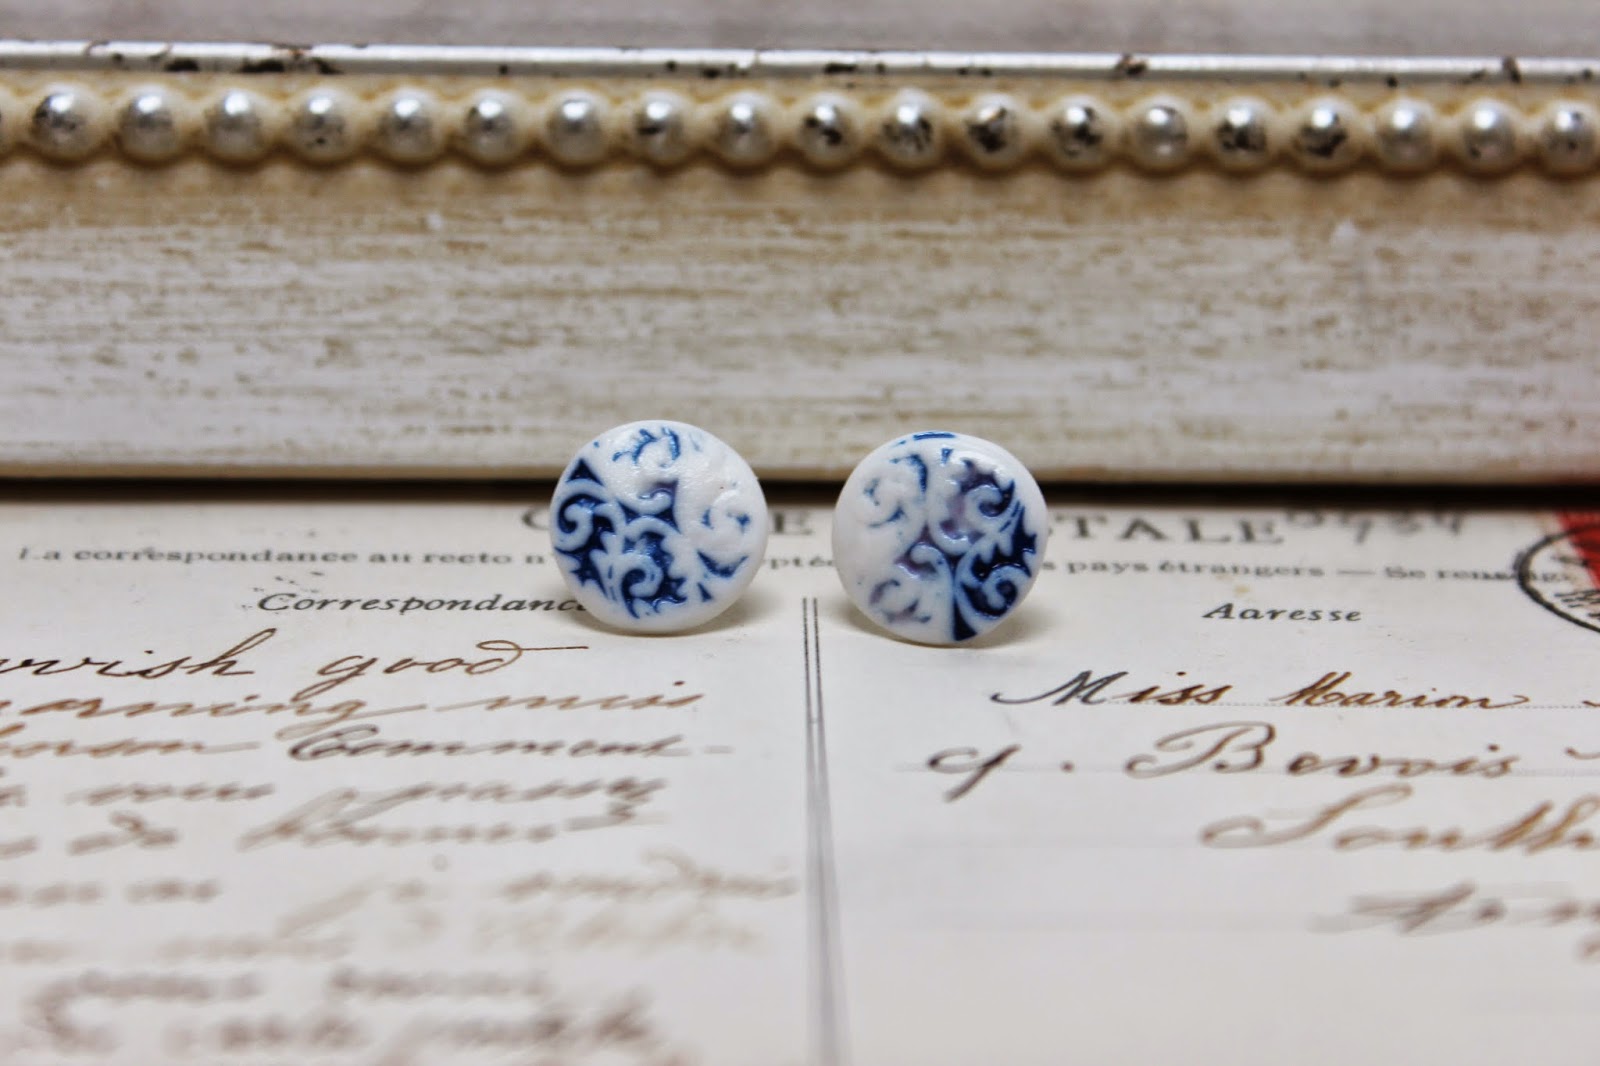 http://www.amanda-mercer.co.uk/pretty-things-for-you/blue-inlay-button-stud-earrings